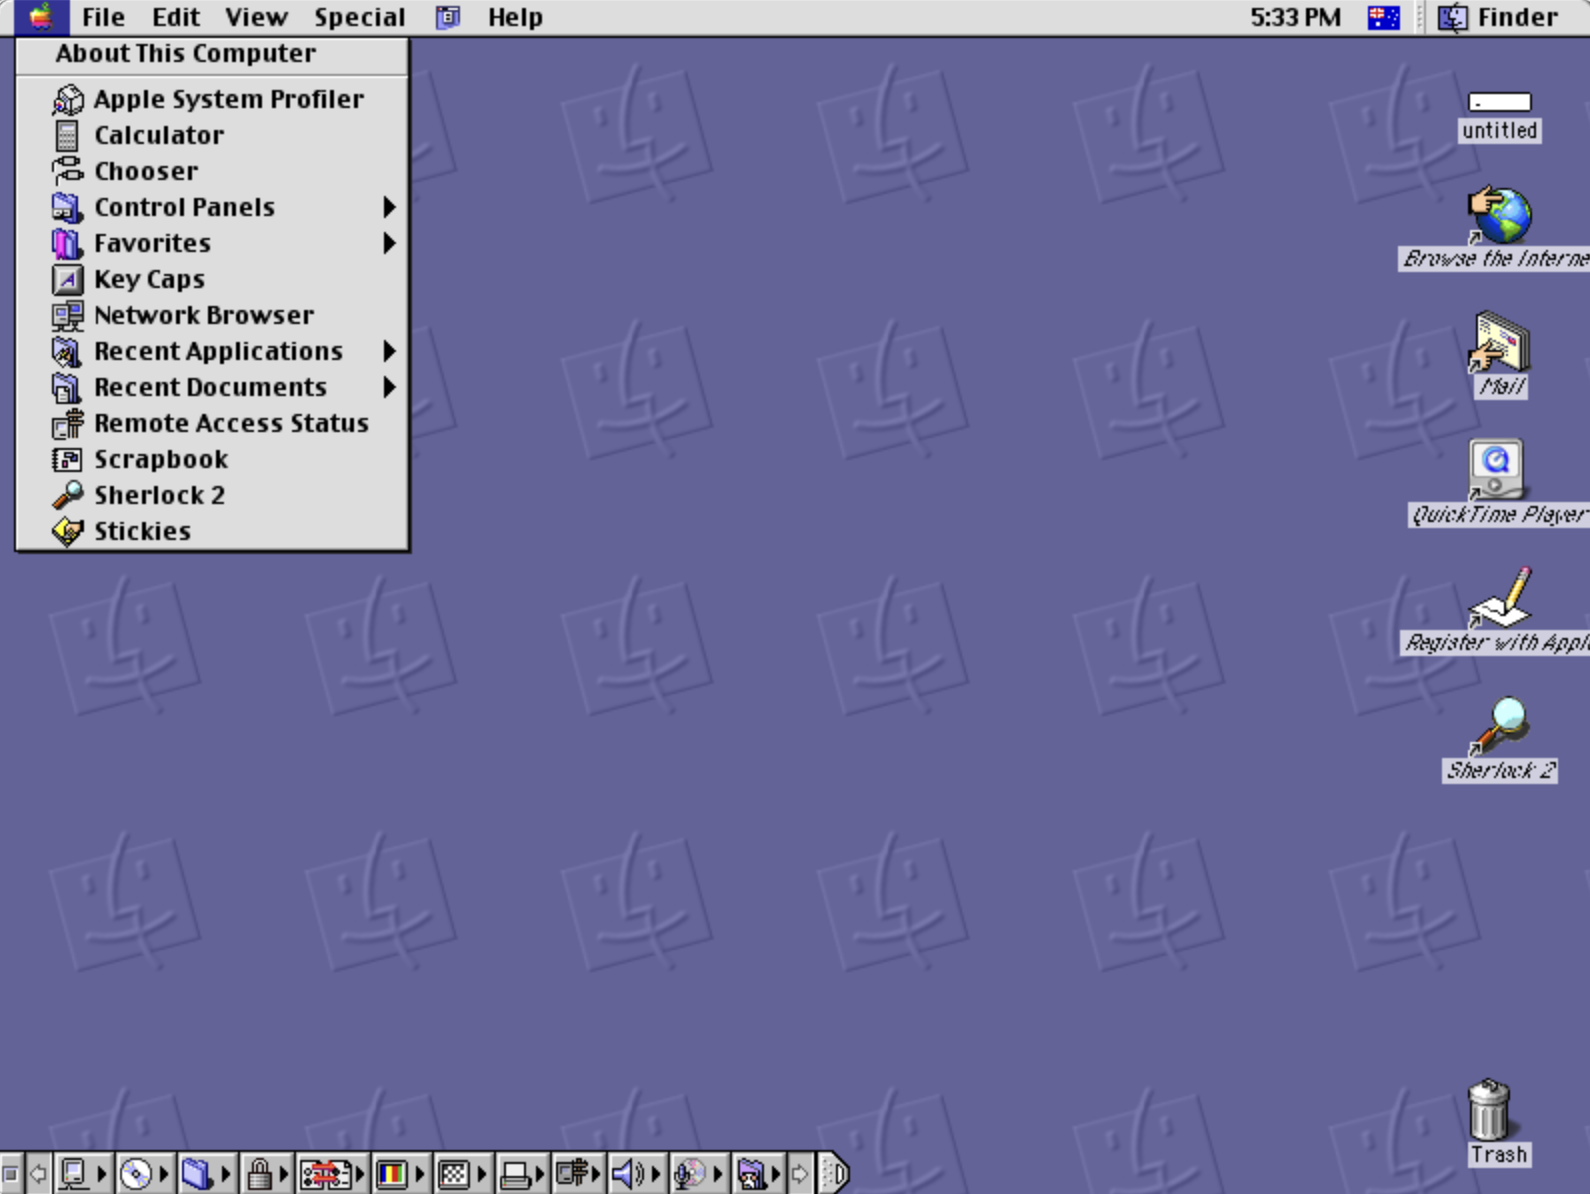 Classic Mac OS. Image from Wikipedia.